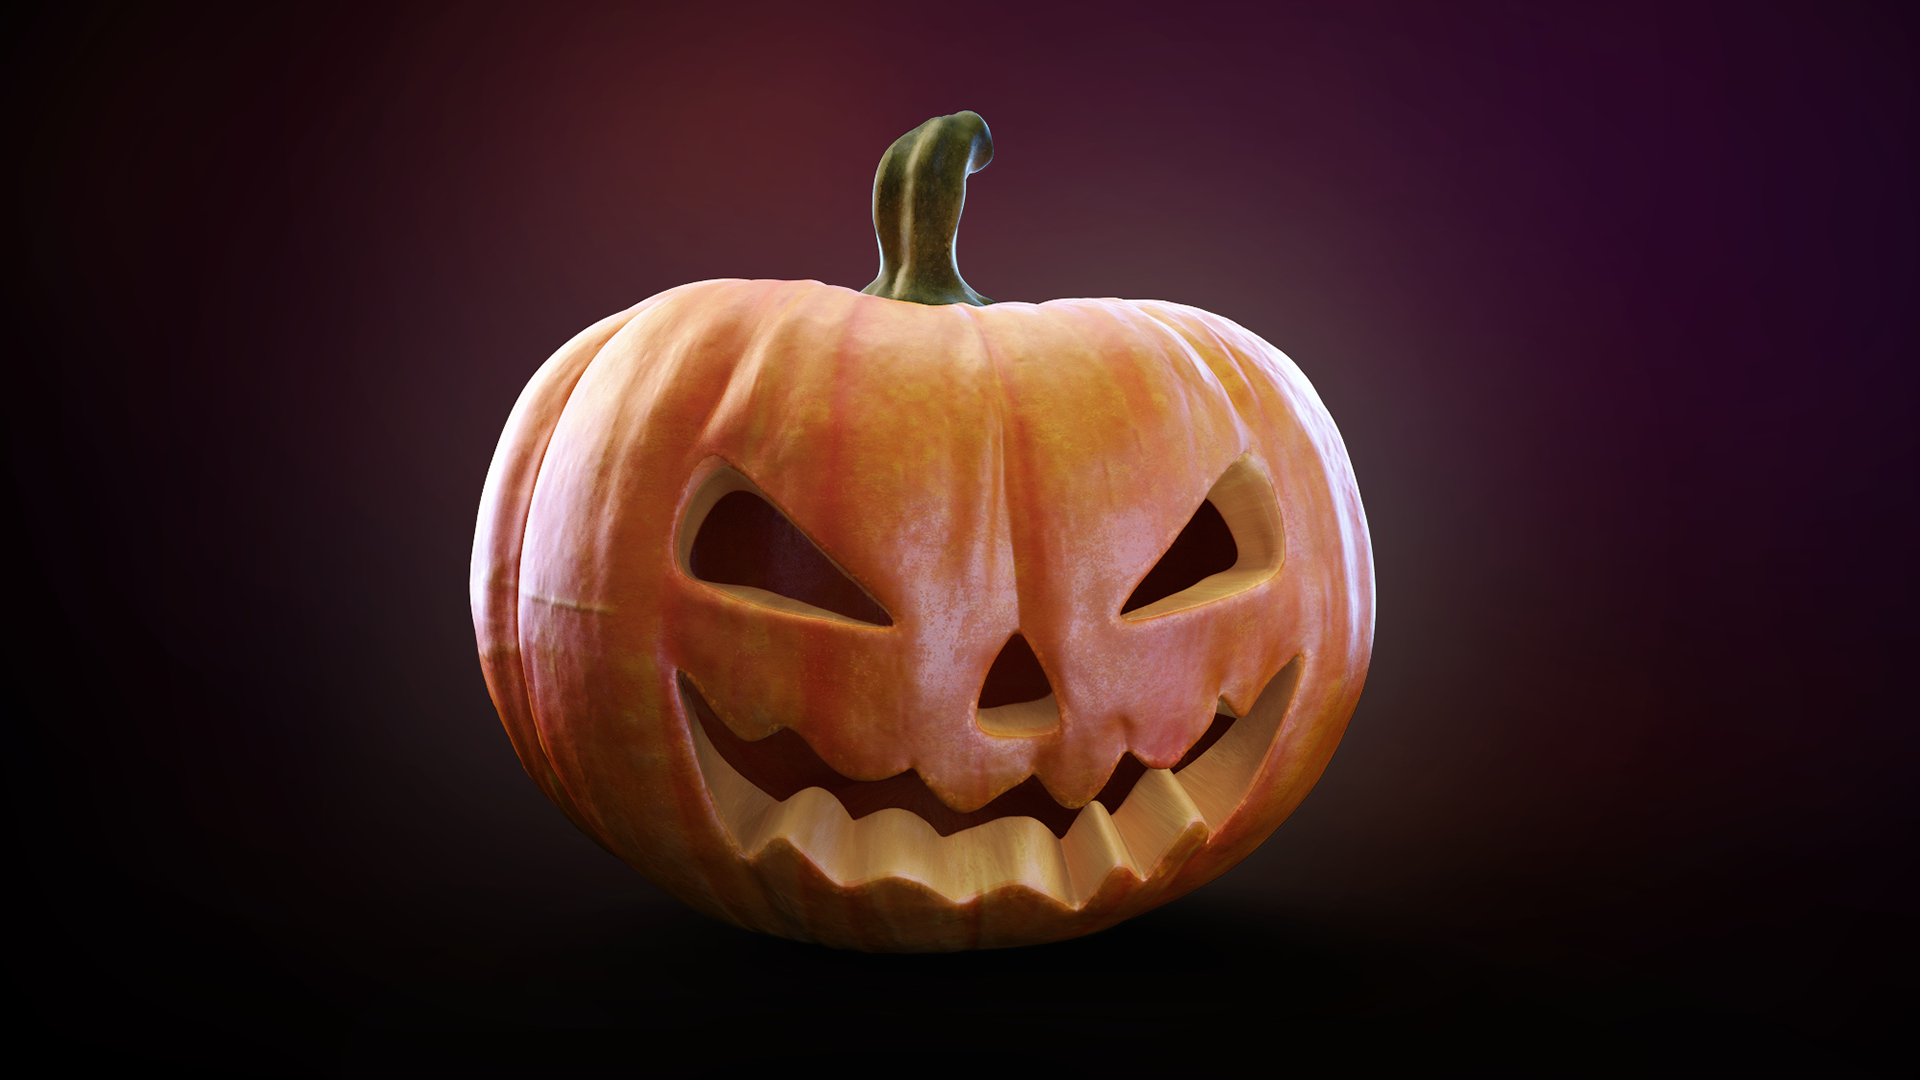 Character vray Zbrush 3D Halloween 3ds max after effects photoshop pumpkin ...